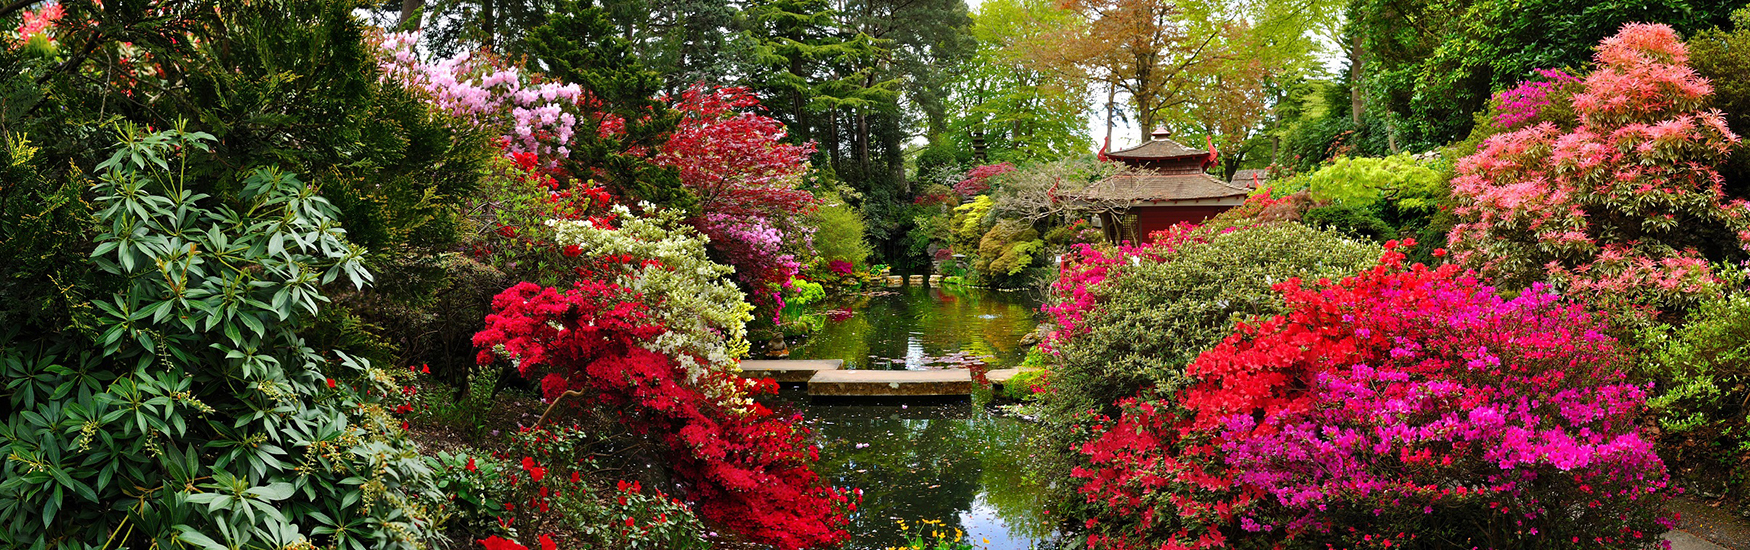 Tranquil scense at the Japenese garden in Comptons Acres Poole 